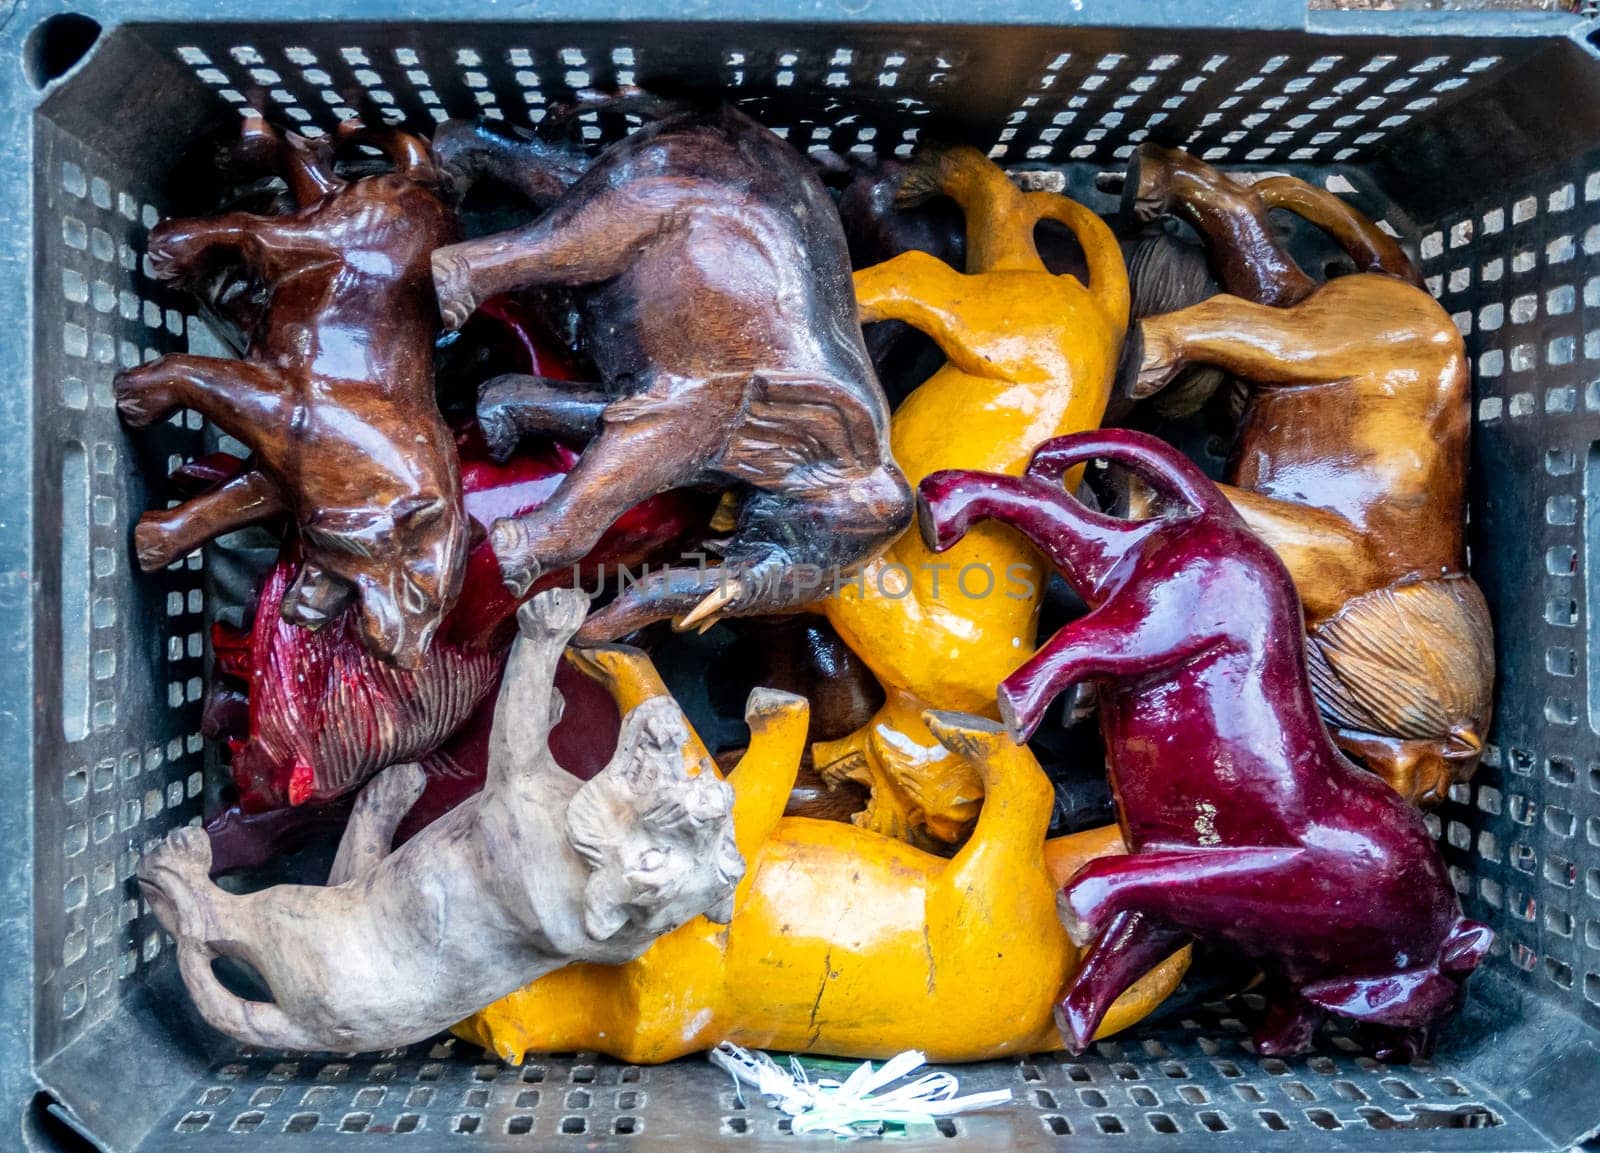 Wood carvings are various animal models. Sold in plastic baskets by Satakorn